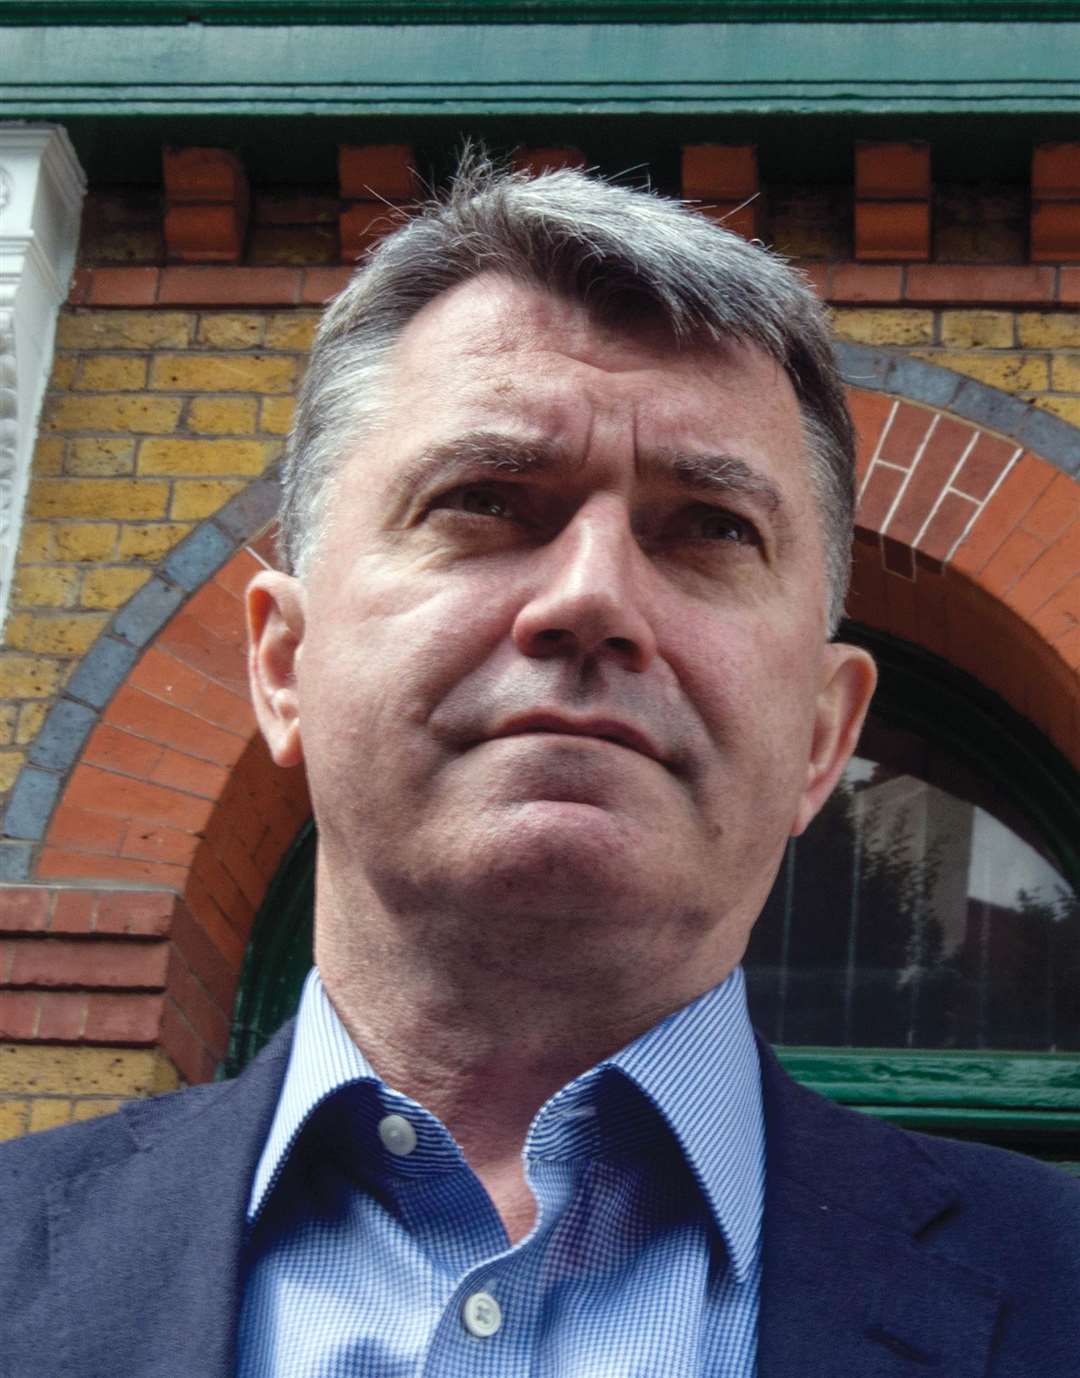 RMT union general secretary Mick Cash said the government will have failed if it did not protect British jobs